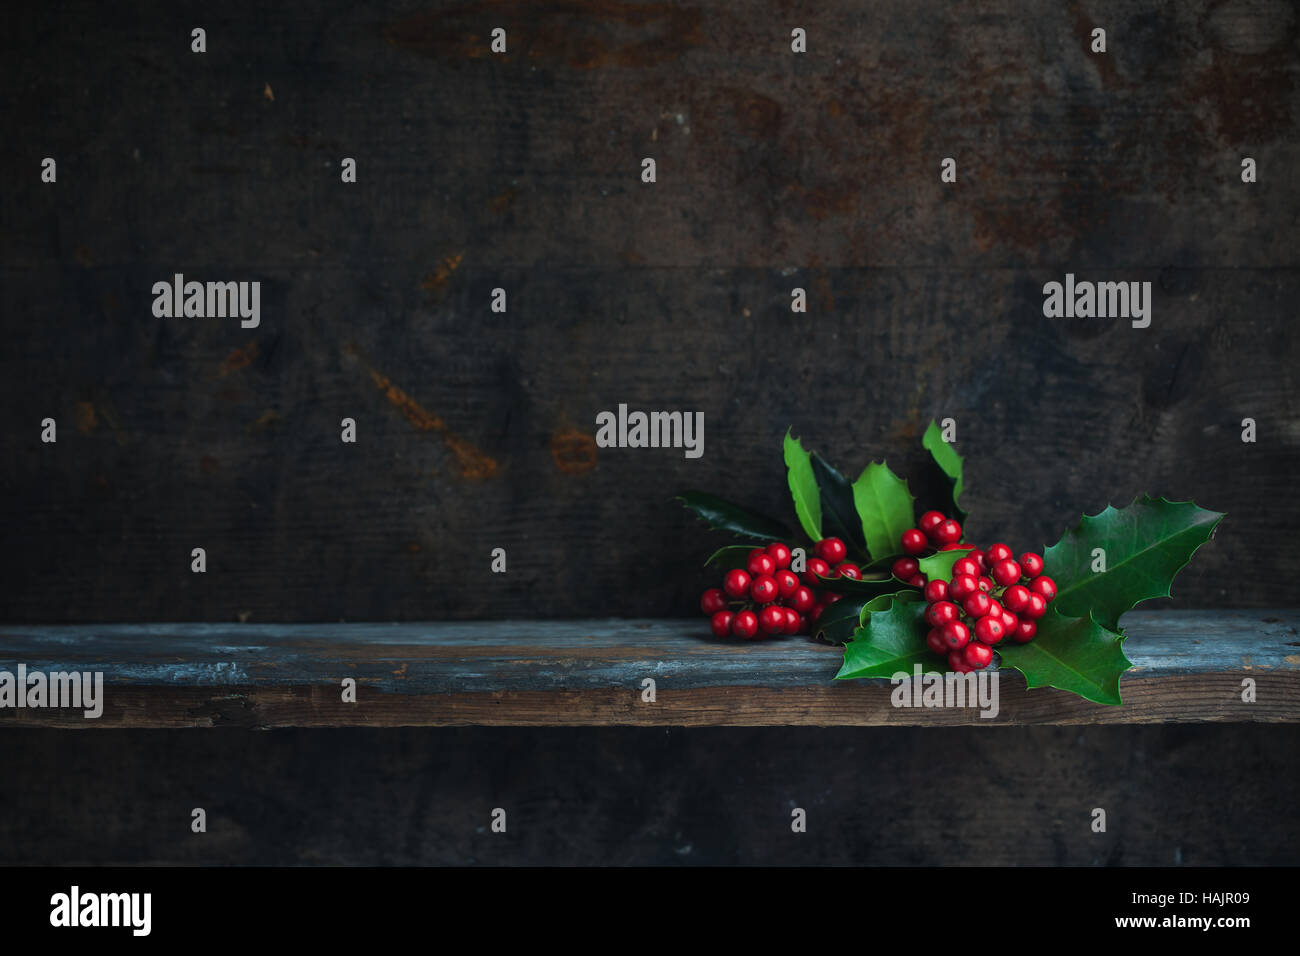 Christmas Holly Twig. Christmas decoration with red berries placed on a wooden shelf. Stock Photo